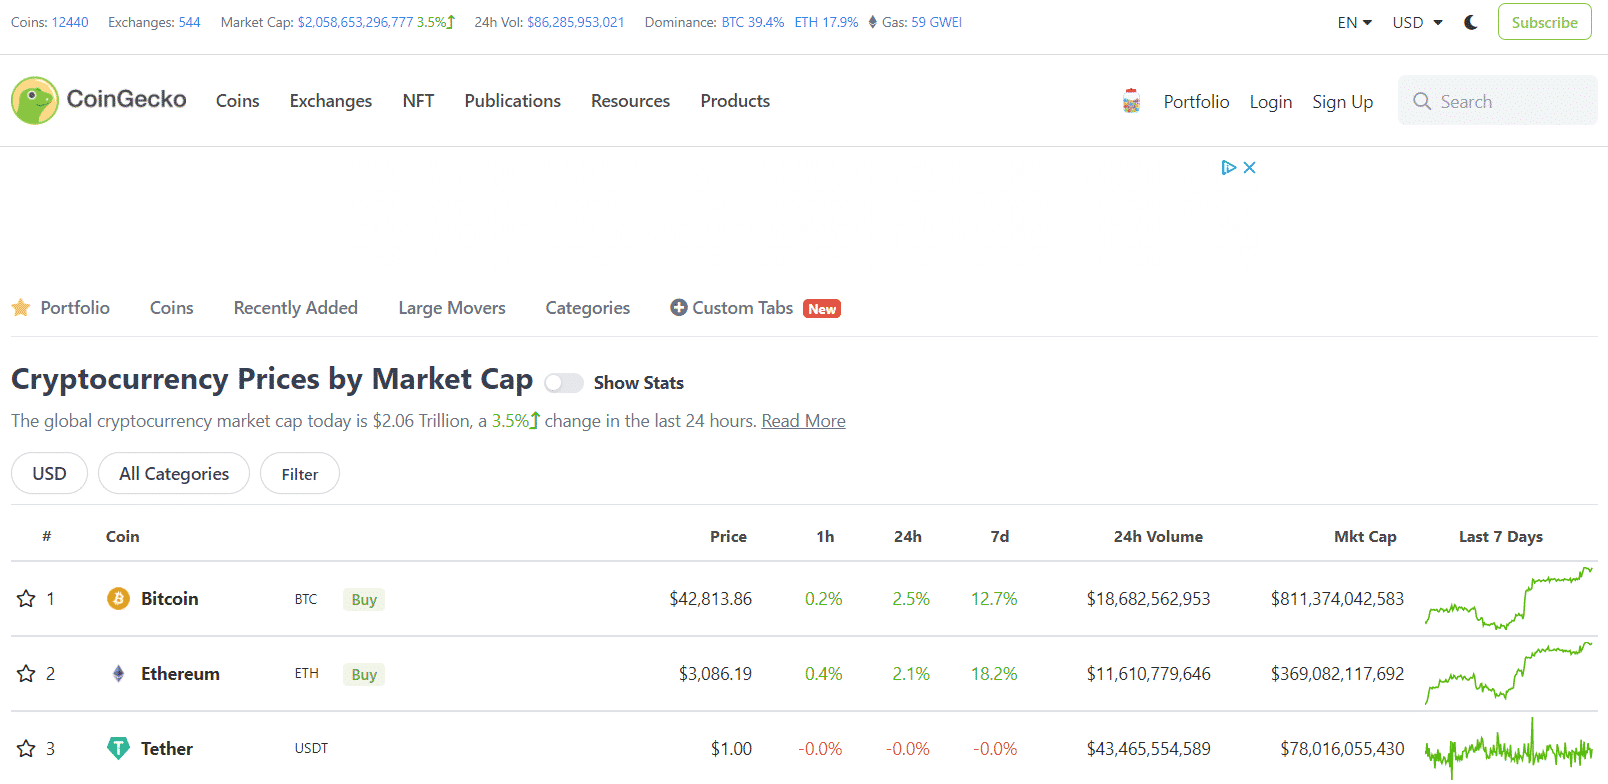 The CoinGecko home page